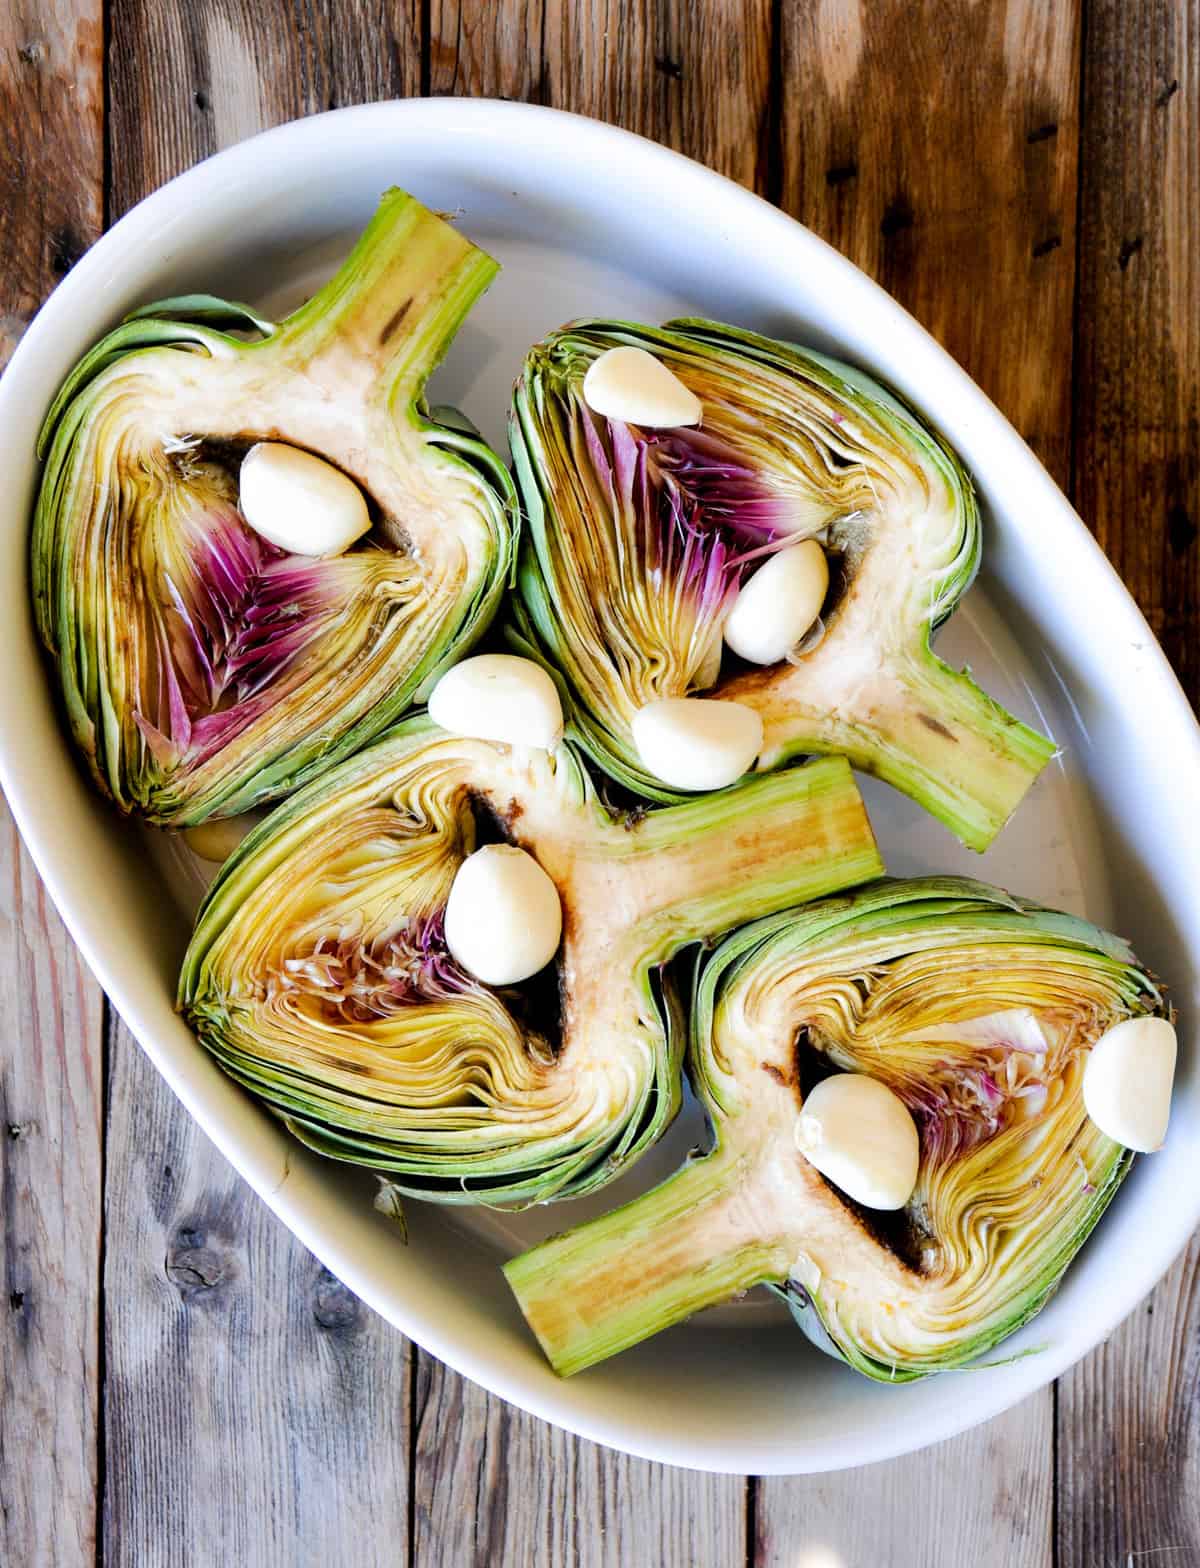 place artichoke halved side up in a baking pan with garlic cloves